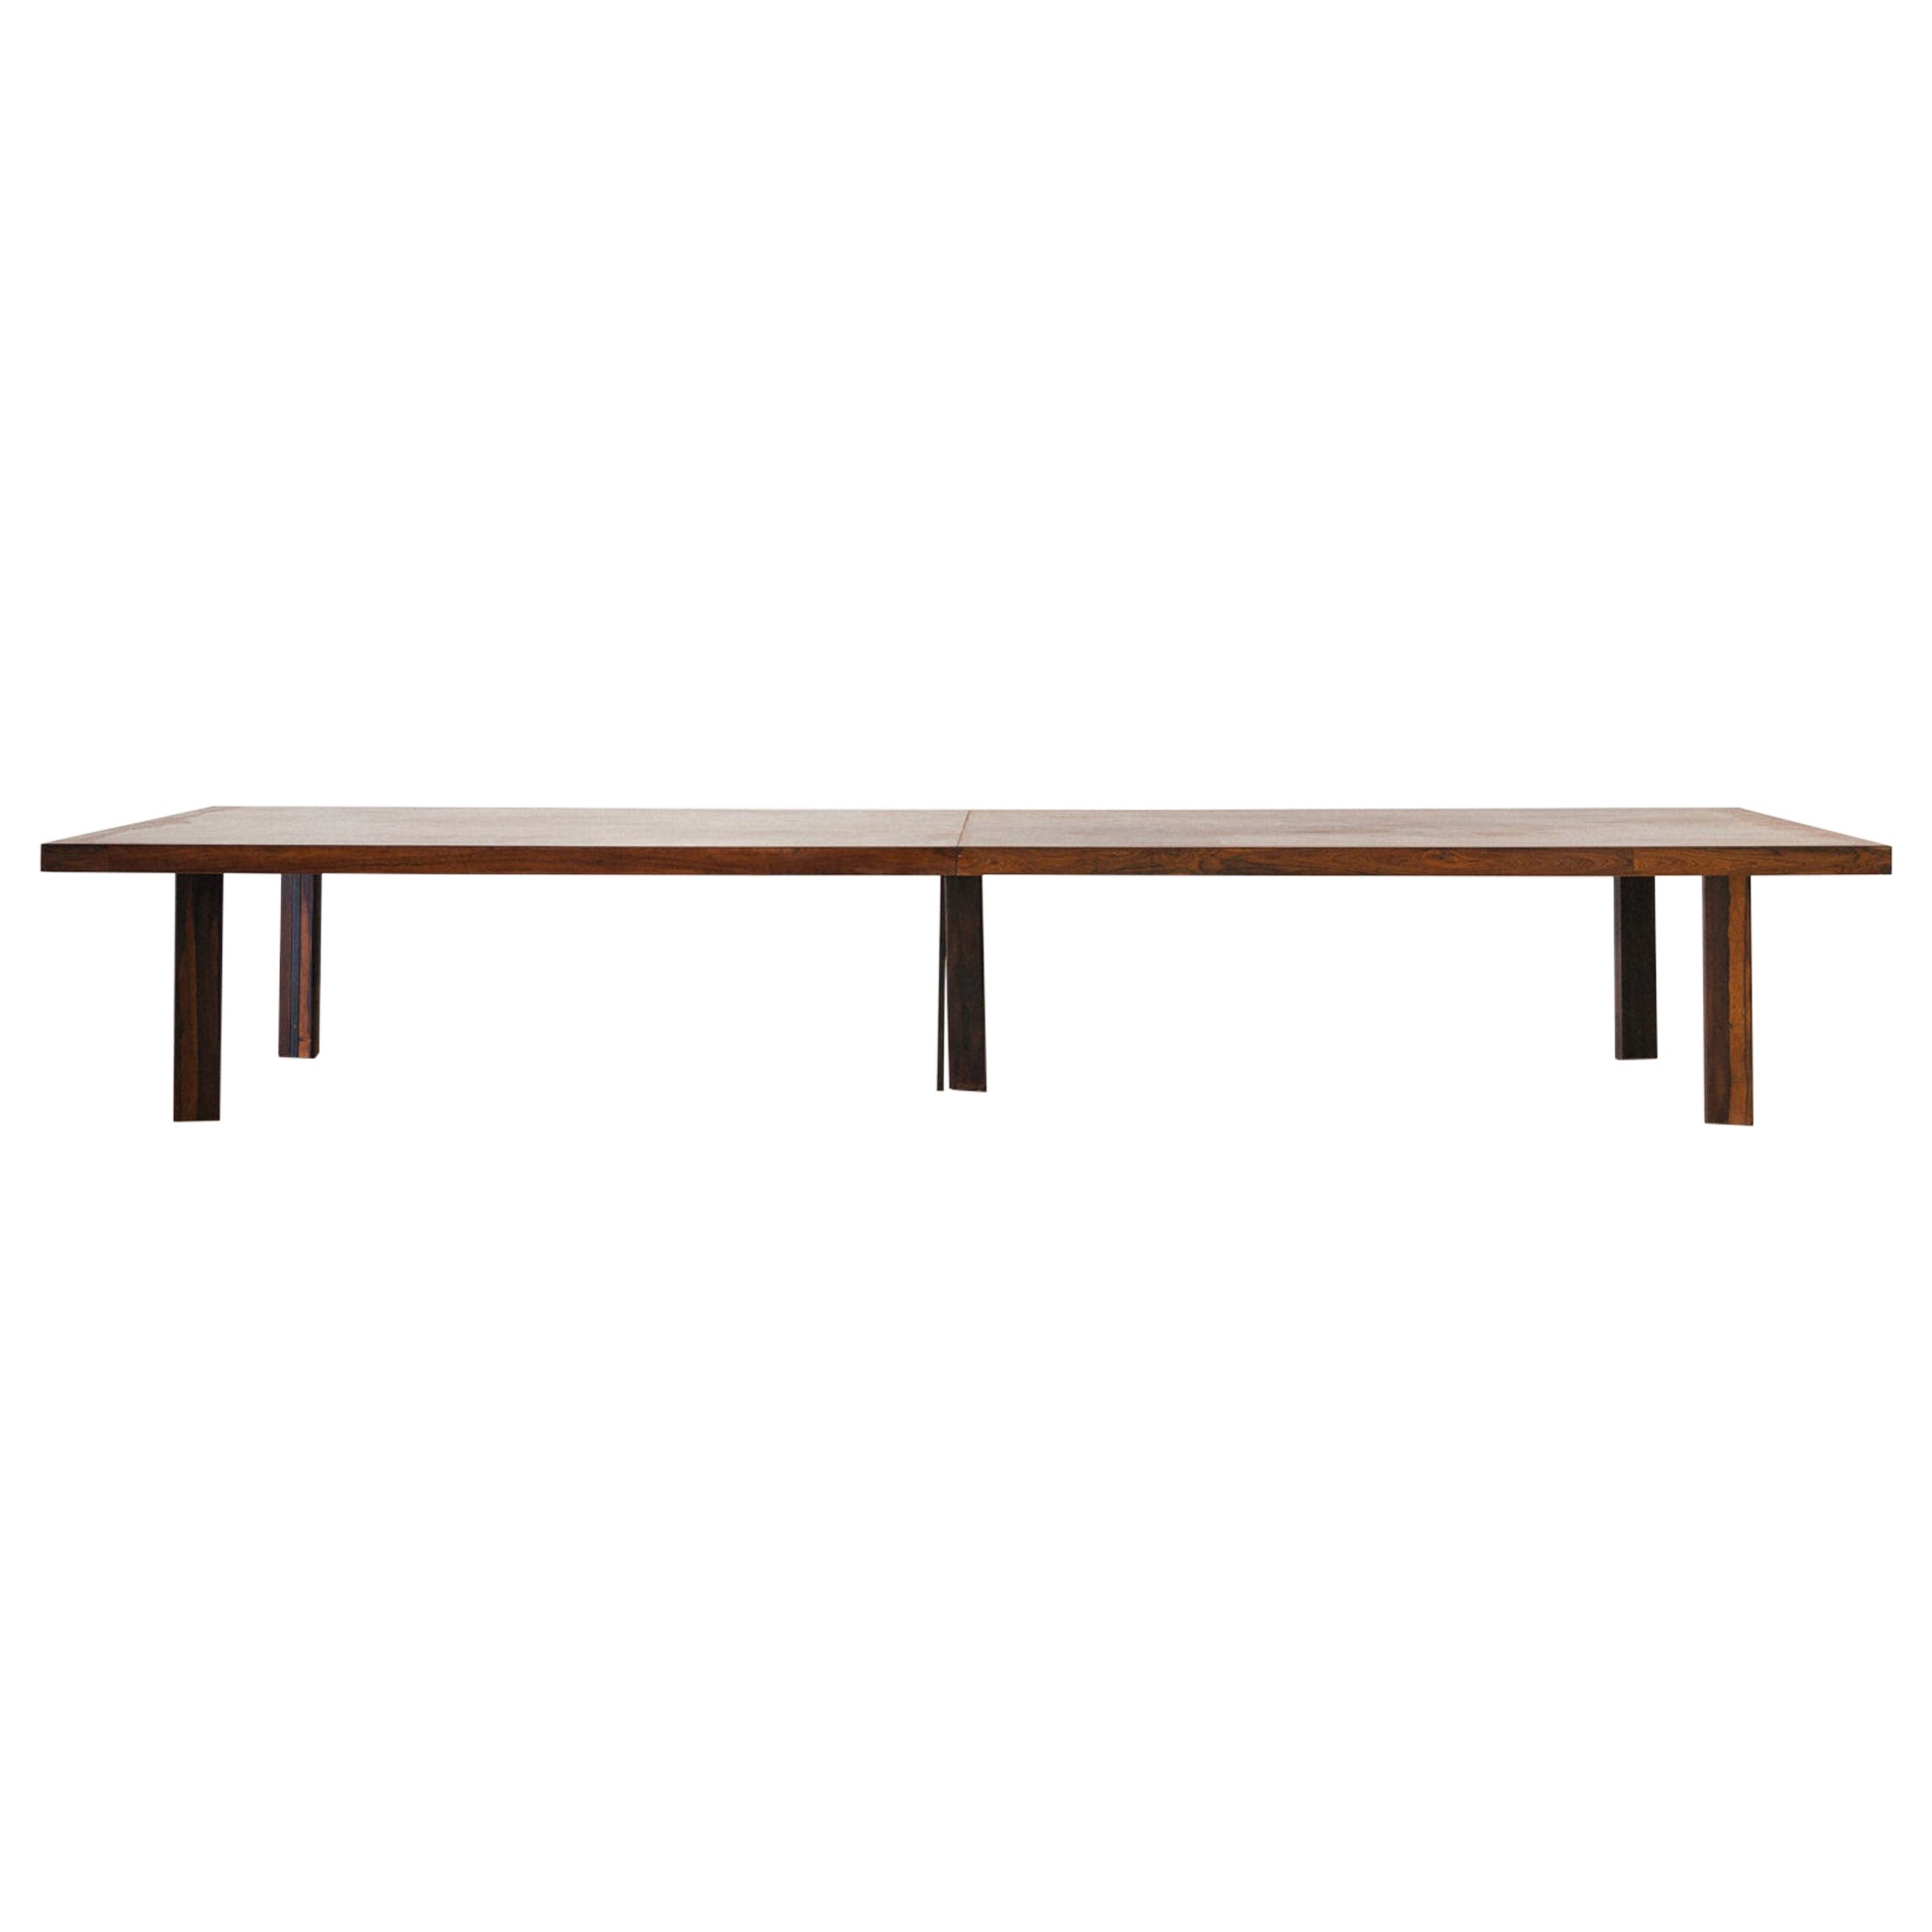 Brazilian Midcentury Dining Table in Rosewood, Unknown Designer, 1960s